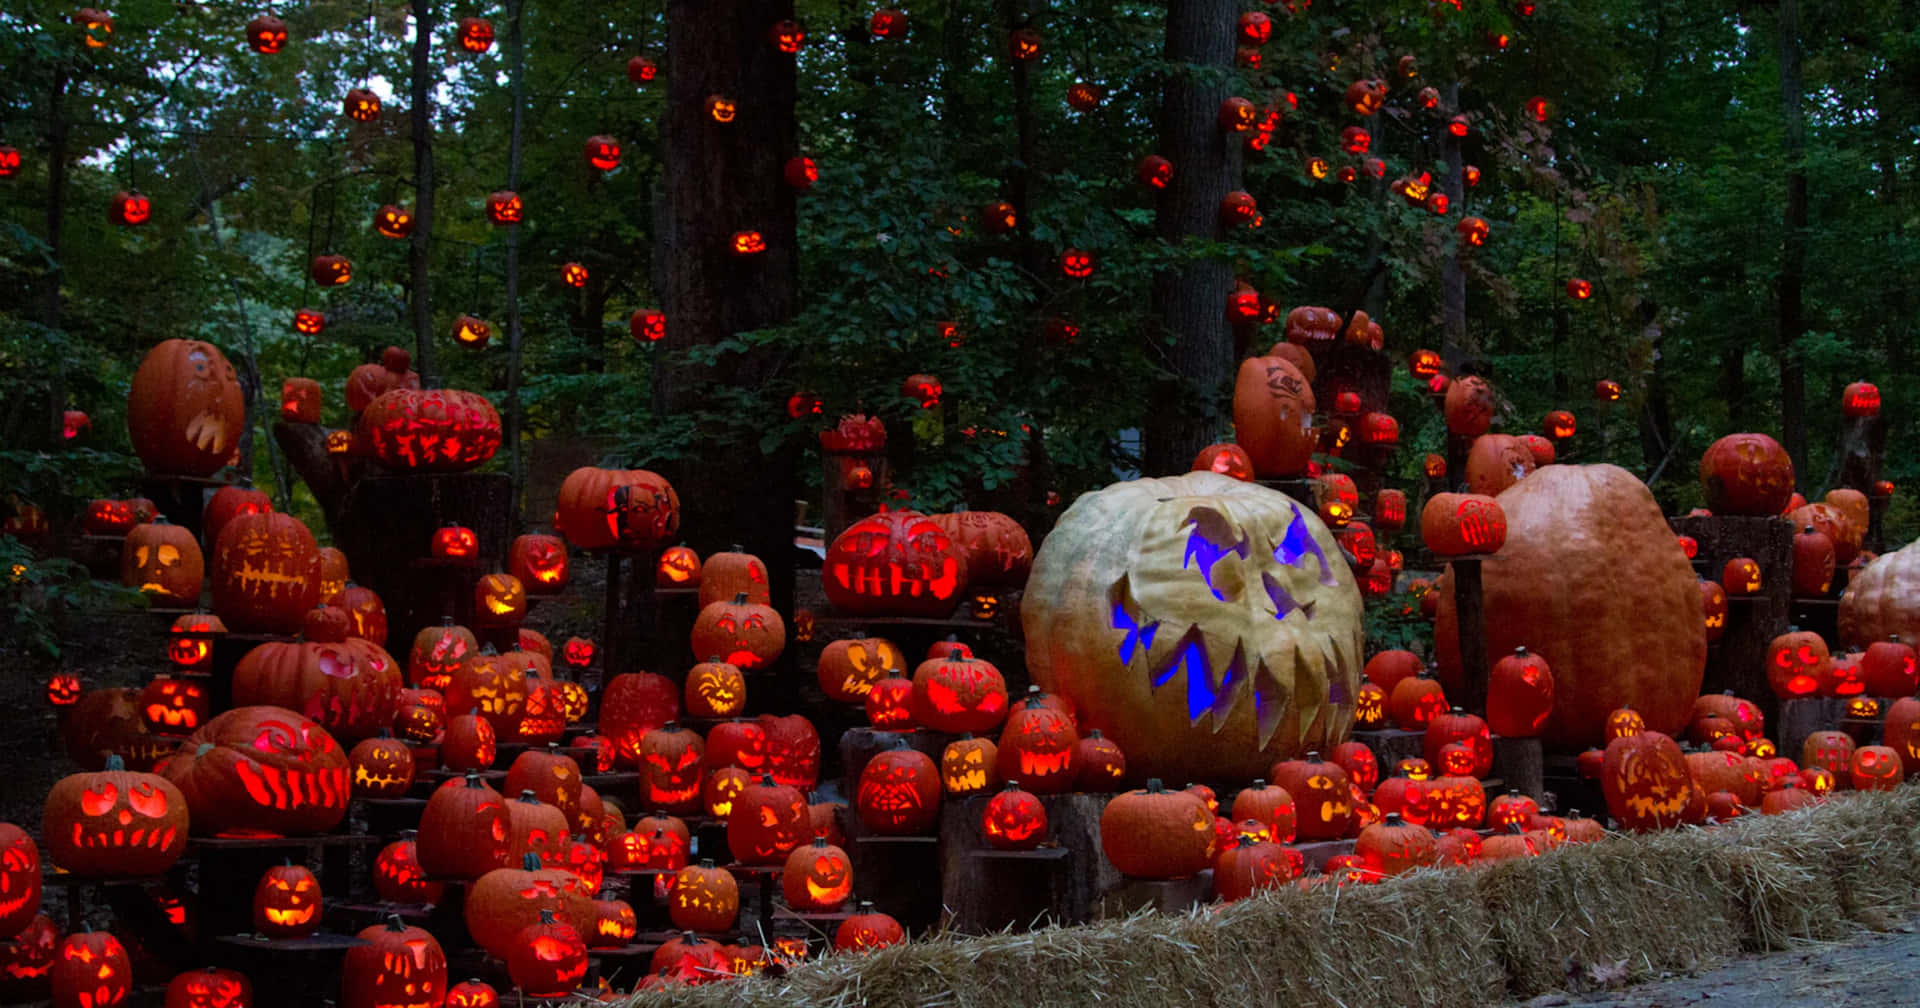 A Group Of Pumpkins Are Lined Up In A Wooded Area